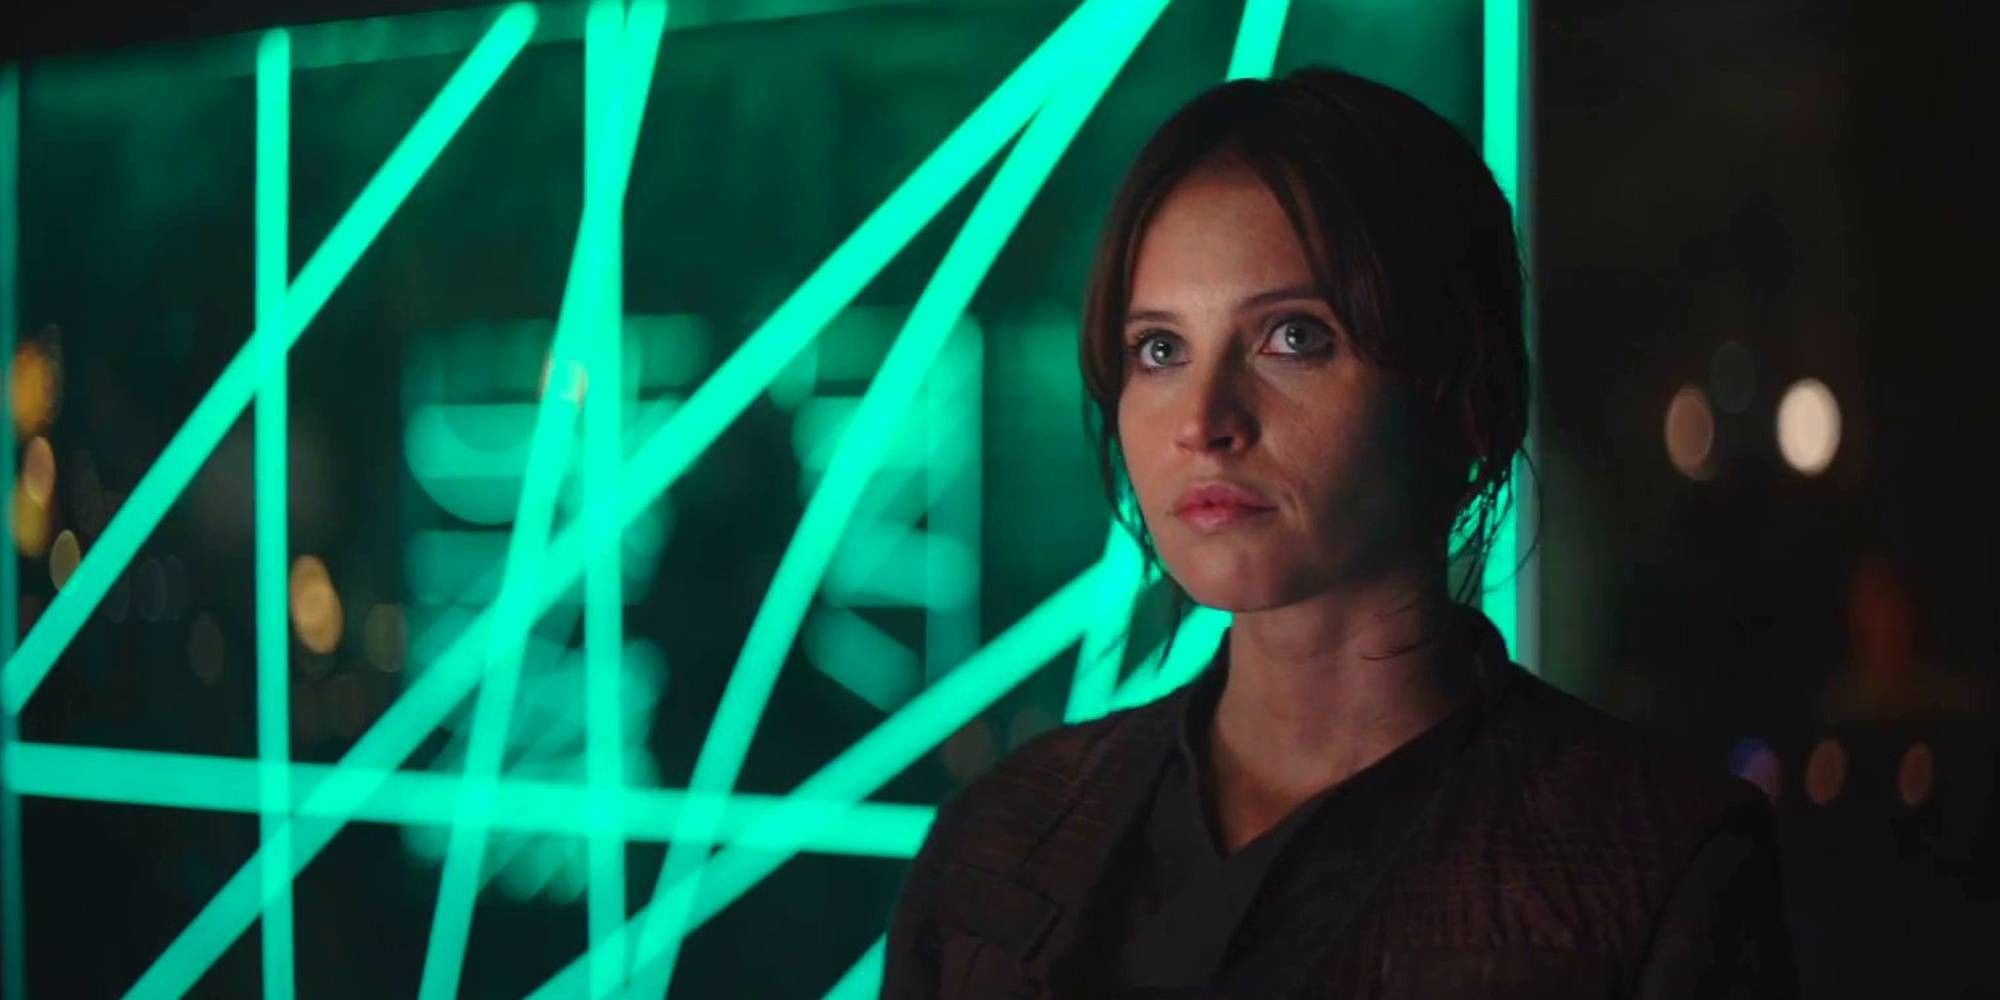 Jyn Erso stands next to a grid of green lights in Star Wars Rogue One